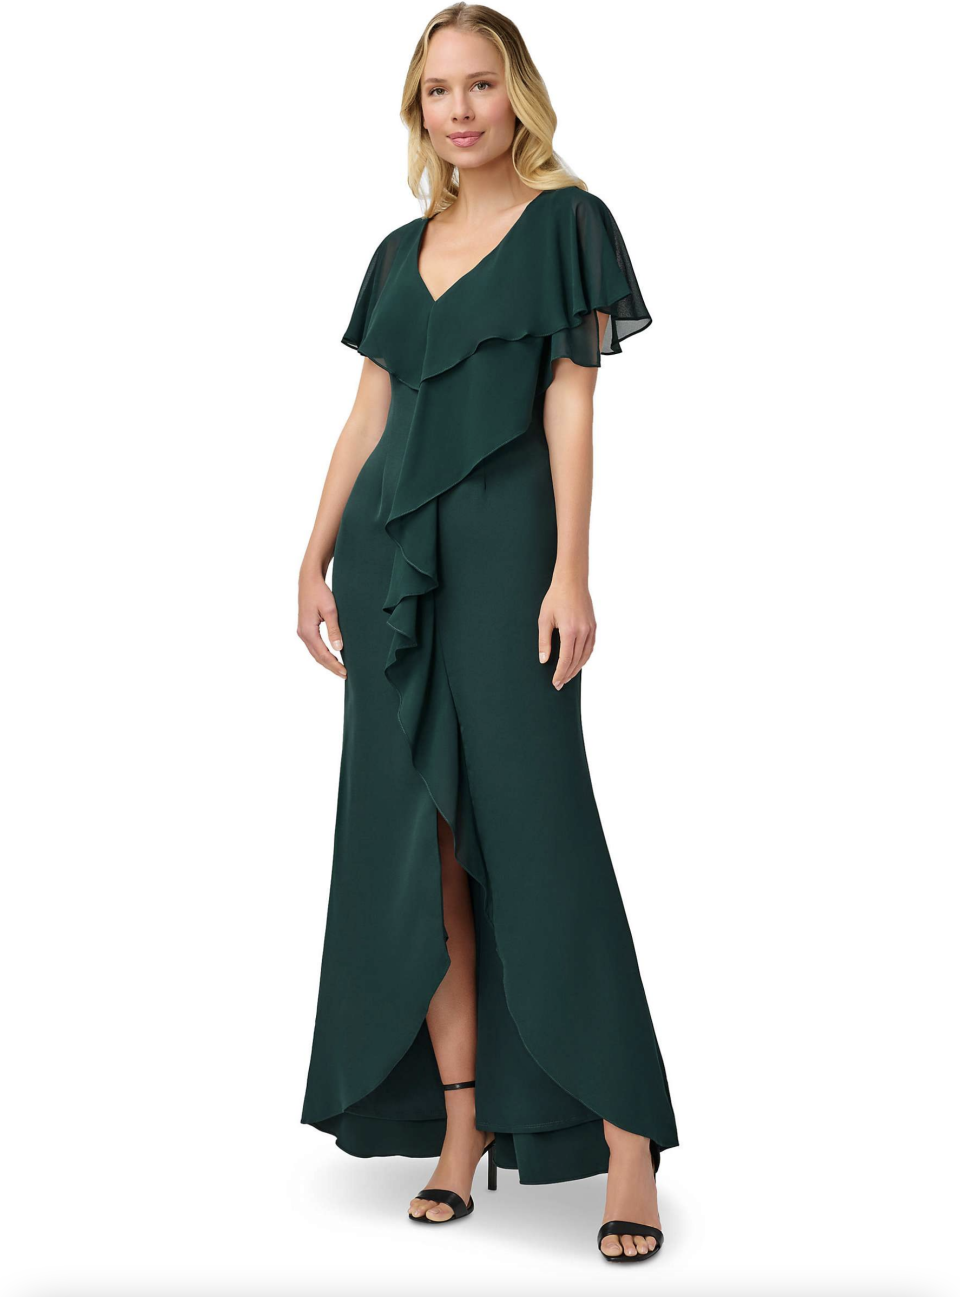 The Christmas party dress we&#39;ve all been looking for by Adrianna Papell. (John Lewis)